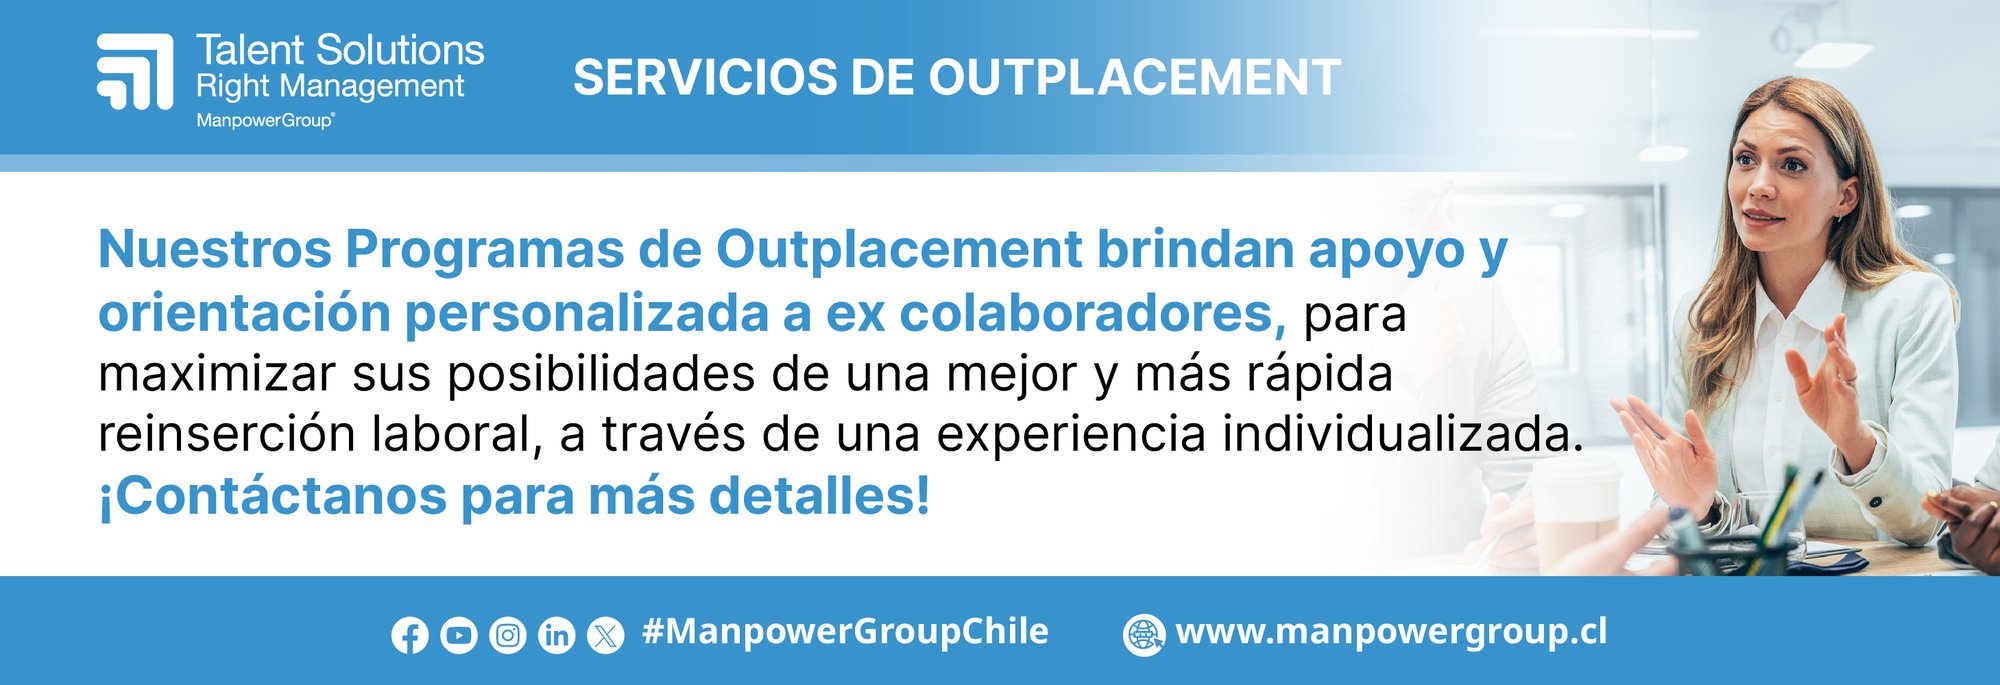 MAN_Chile_Campaña Outplacement 3_Banner3 blue